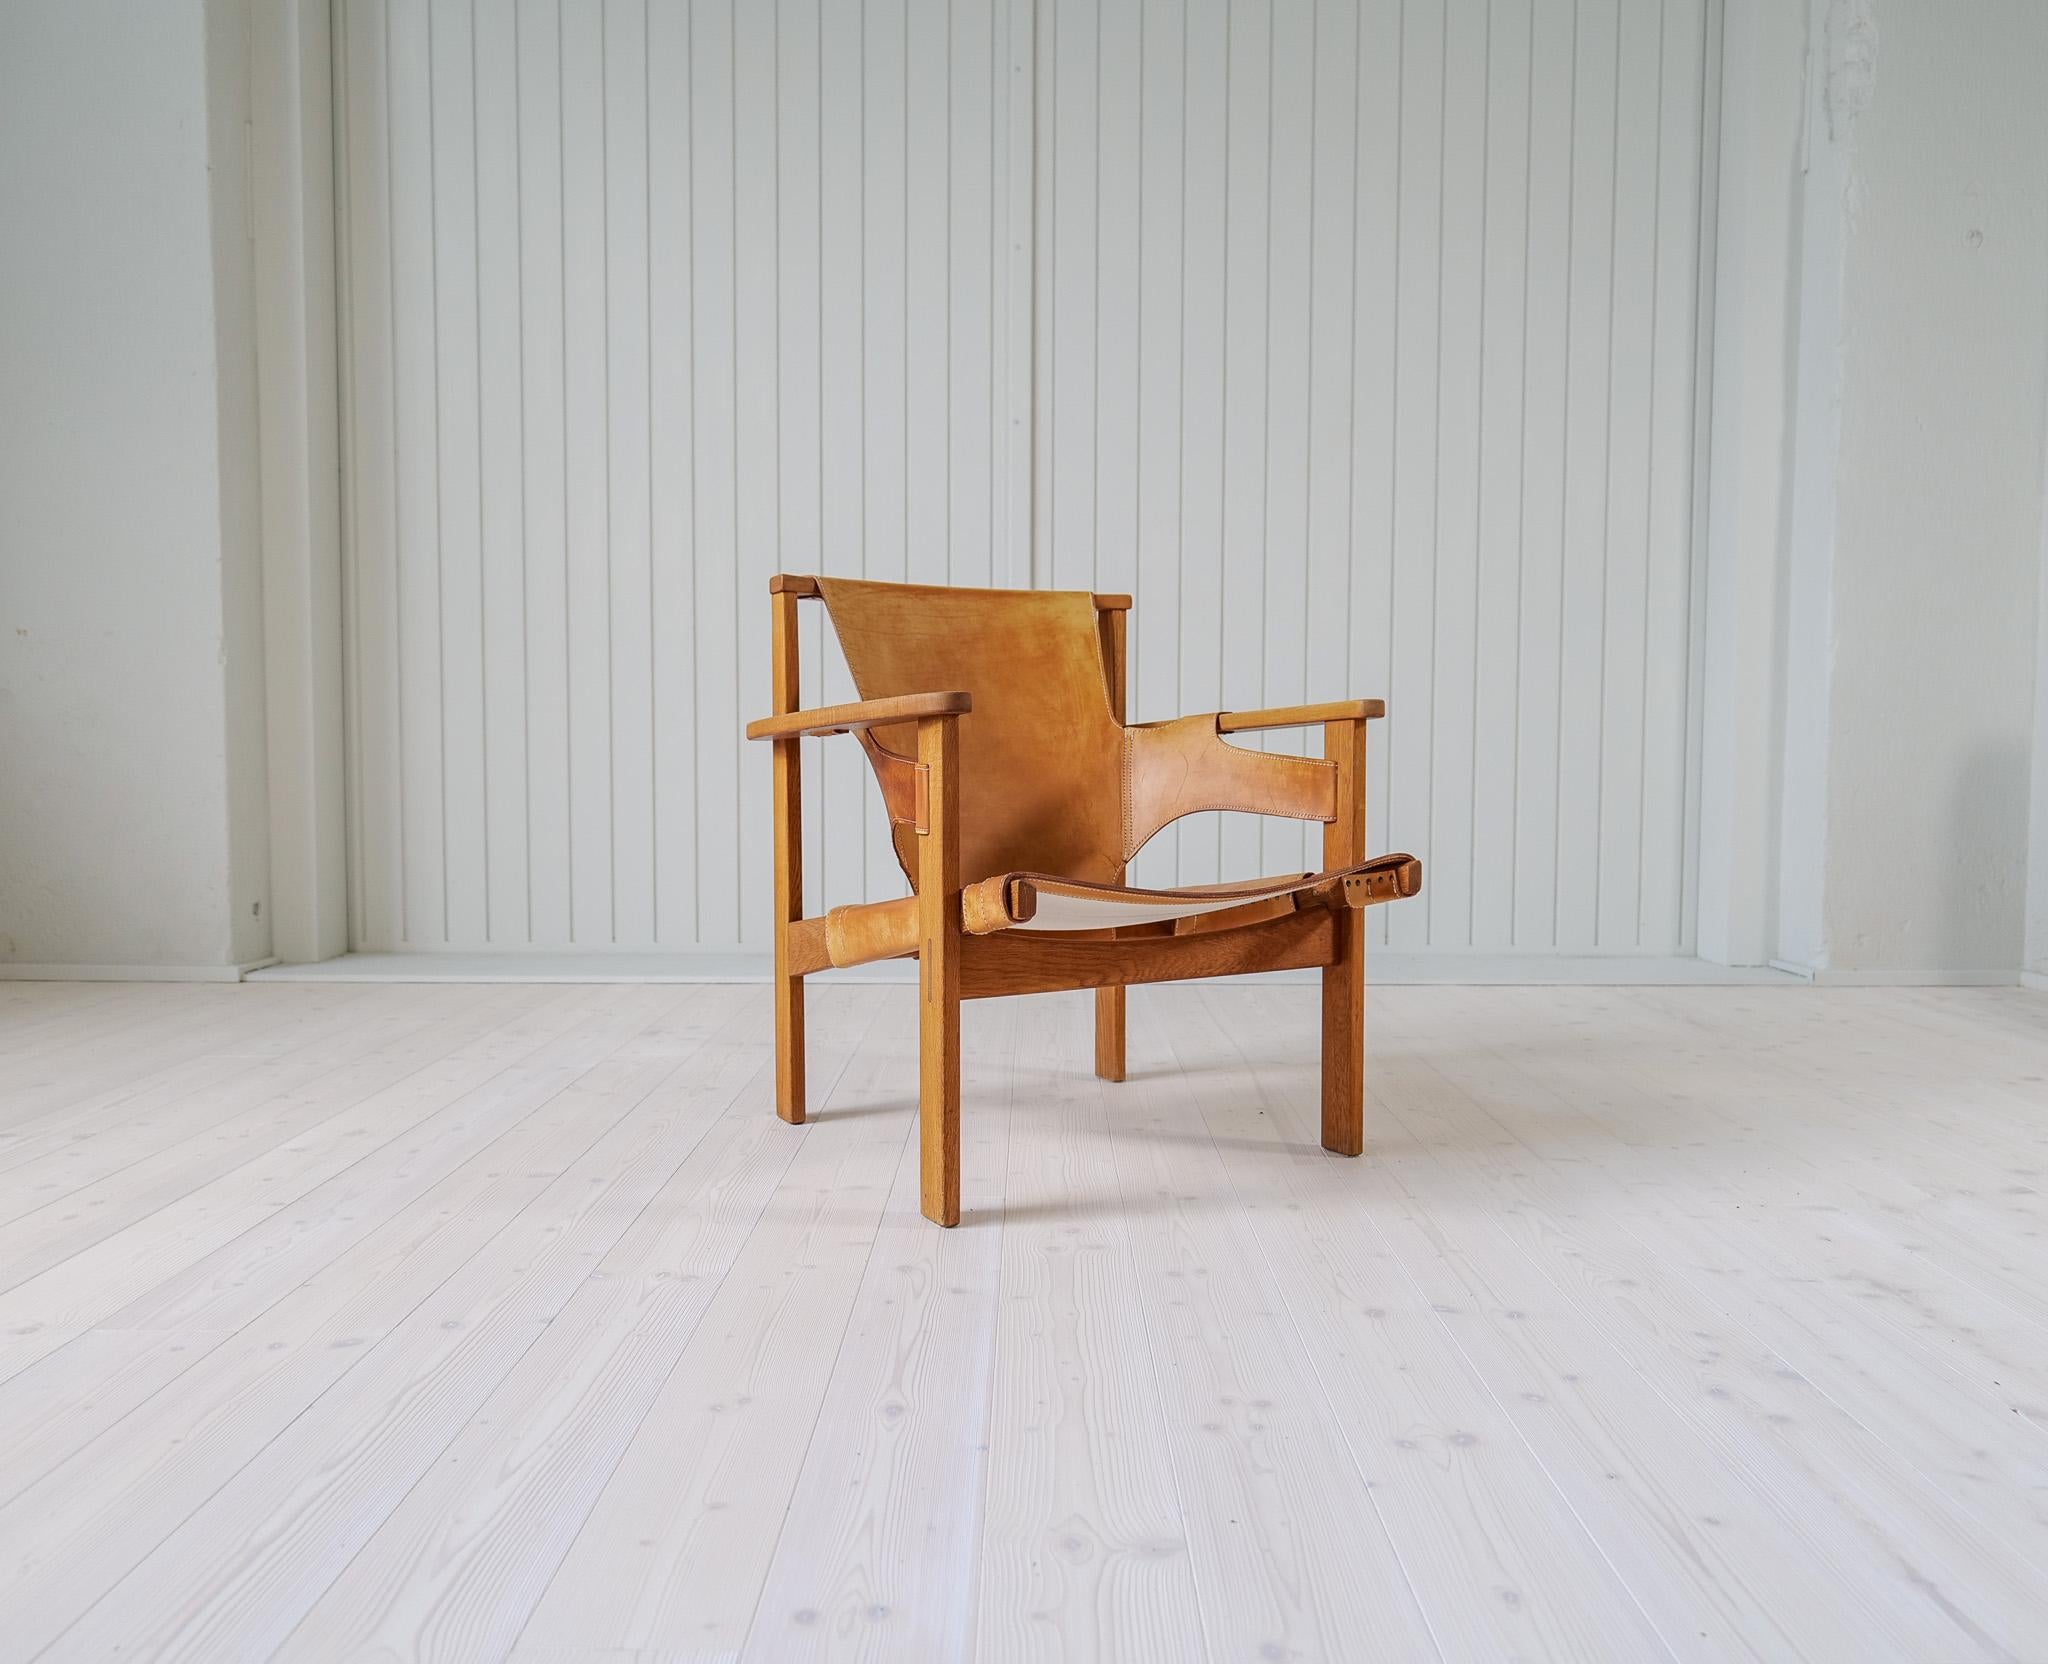 This beautiful armchair was designed in 1957 by Carl Axel Acking. When first shown in the Triennal show in Milan the chair was made by NK (Nordiska Kompaniet) and was given the name 